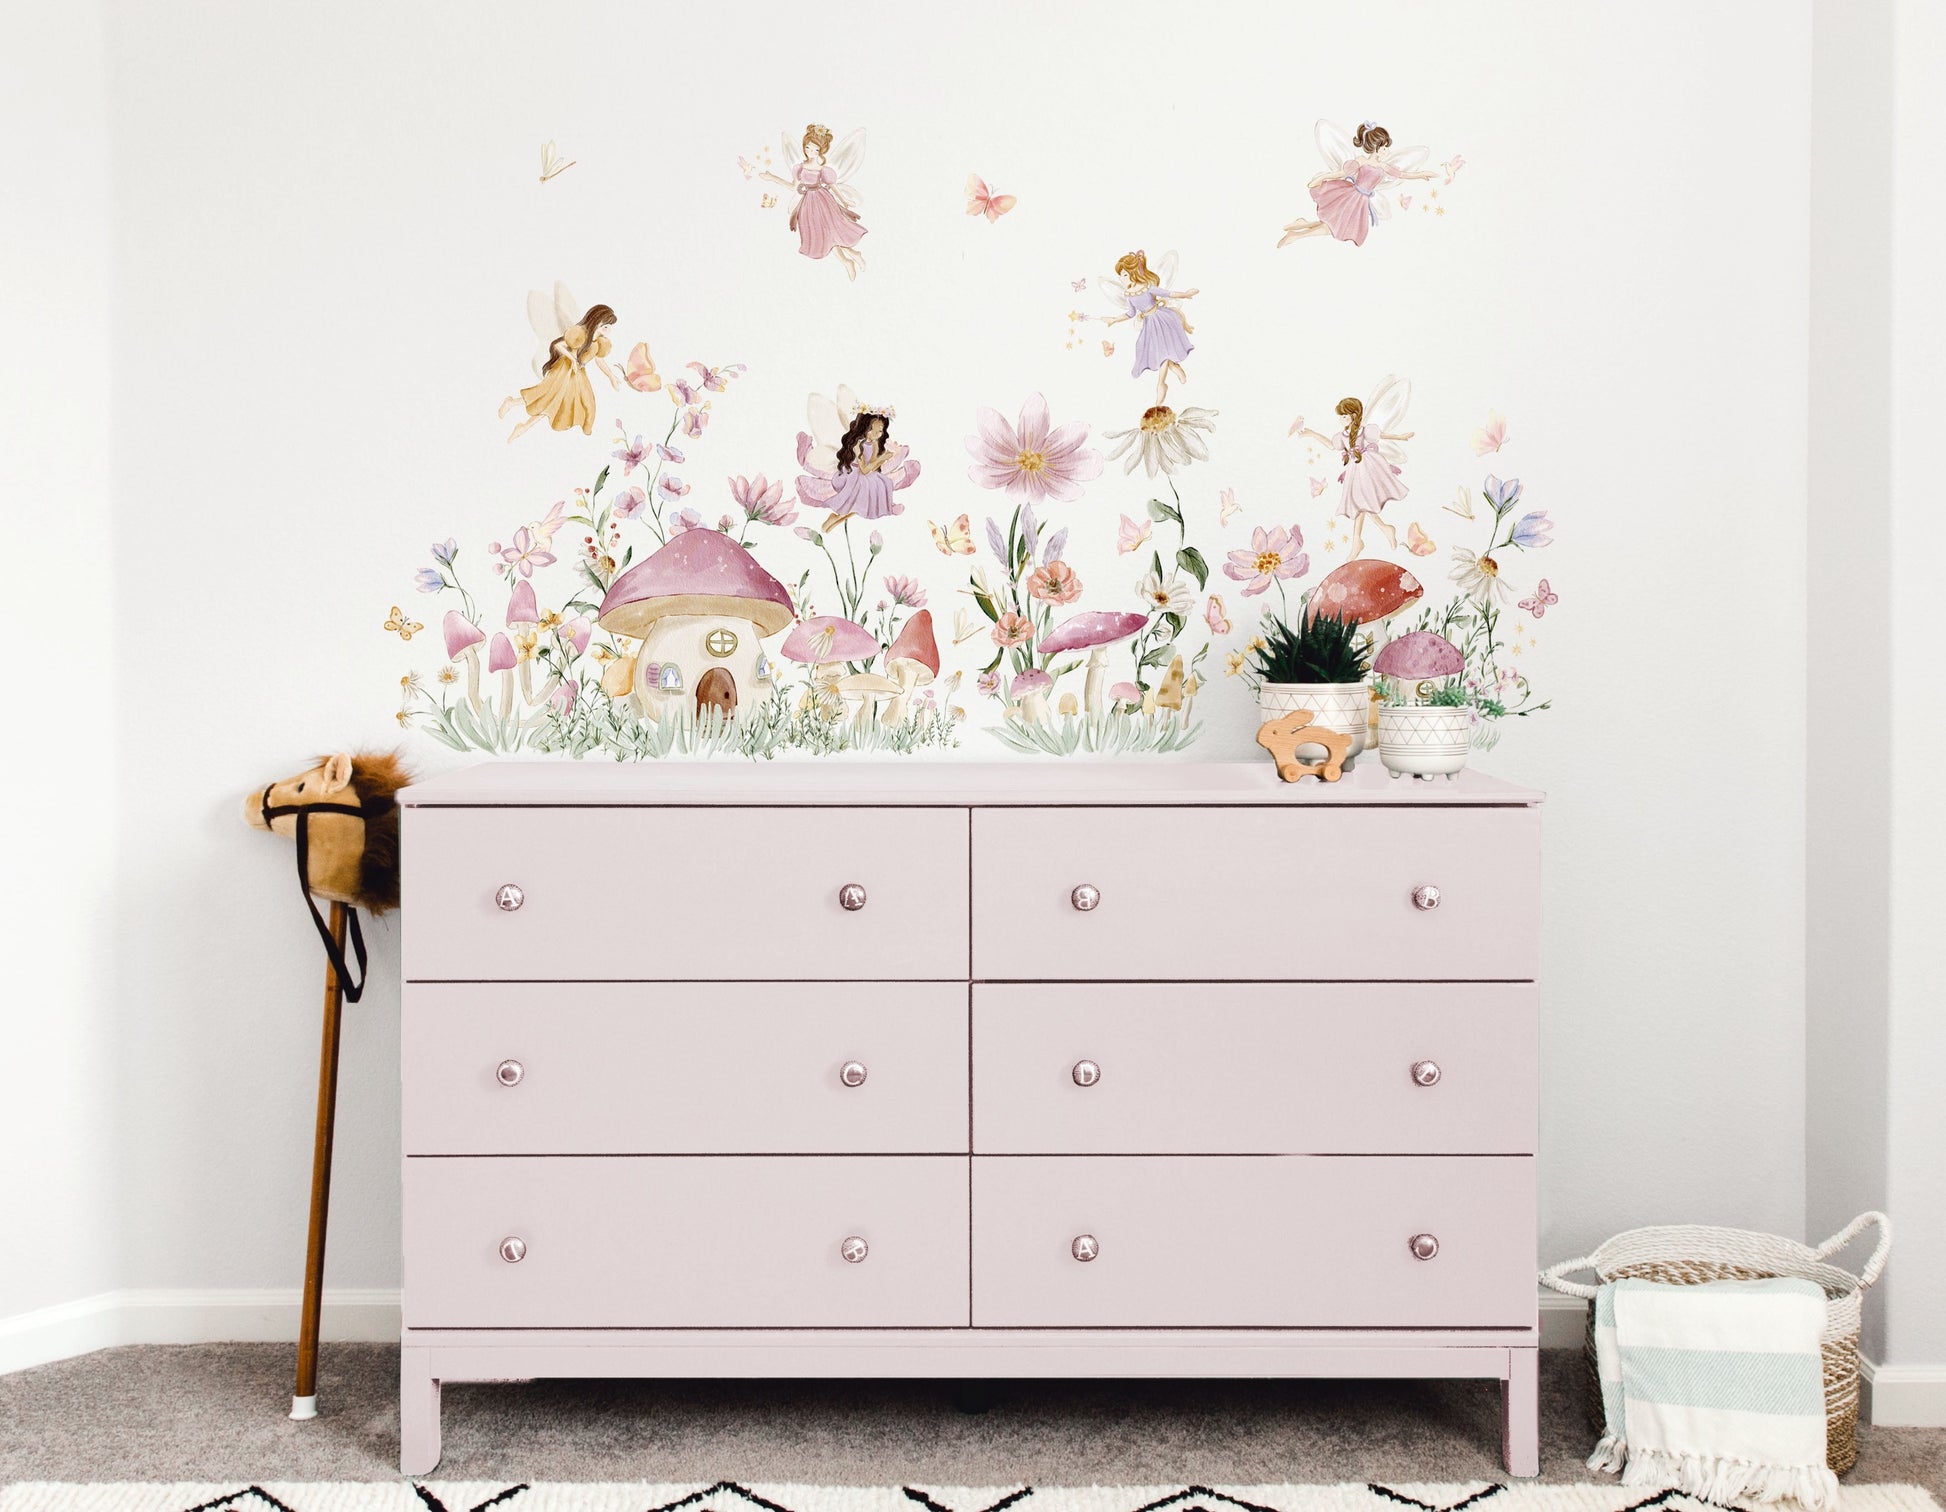 Enchanted Fairy Wall Stickers (Medium Set) - Wall Decals - Fable and Fawn 